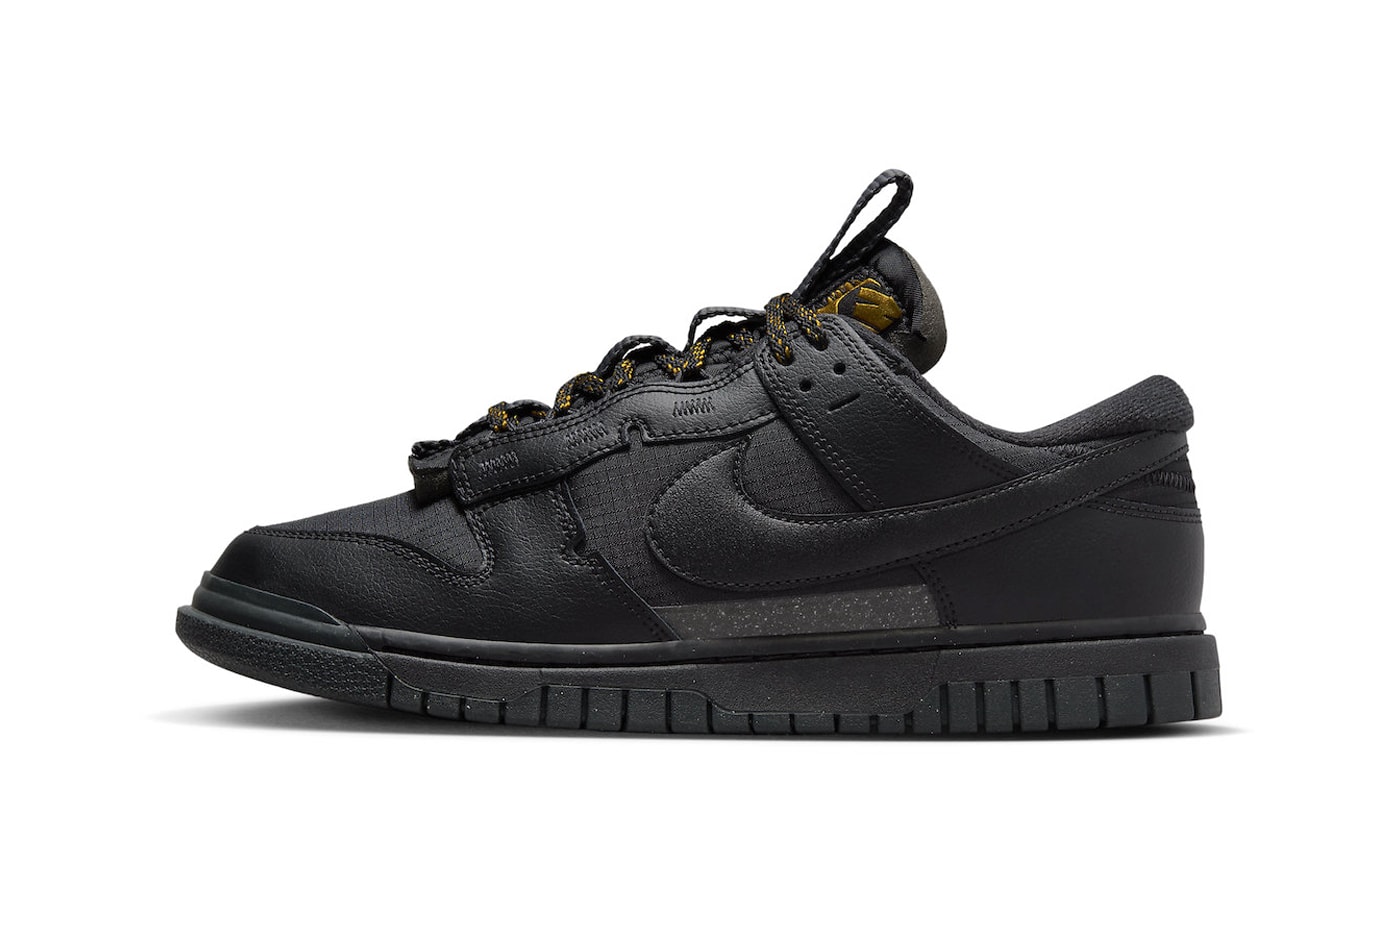 Nike Dunk Low Remastered Appears in Black and Gold FB8894-001 Black/Black-Metallic Gold low top skater shoes holiday 2023 swoosh